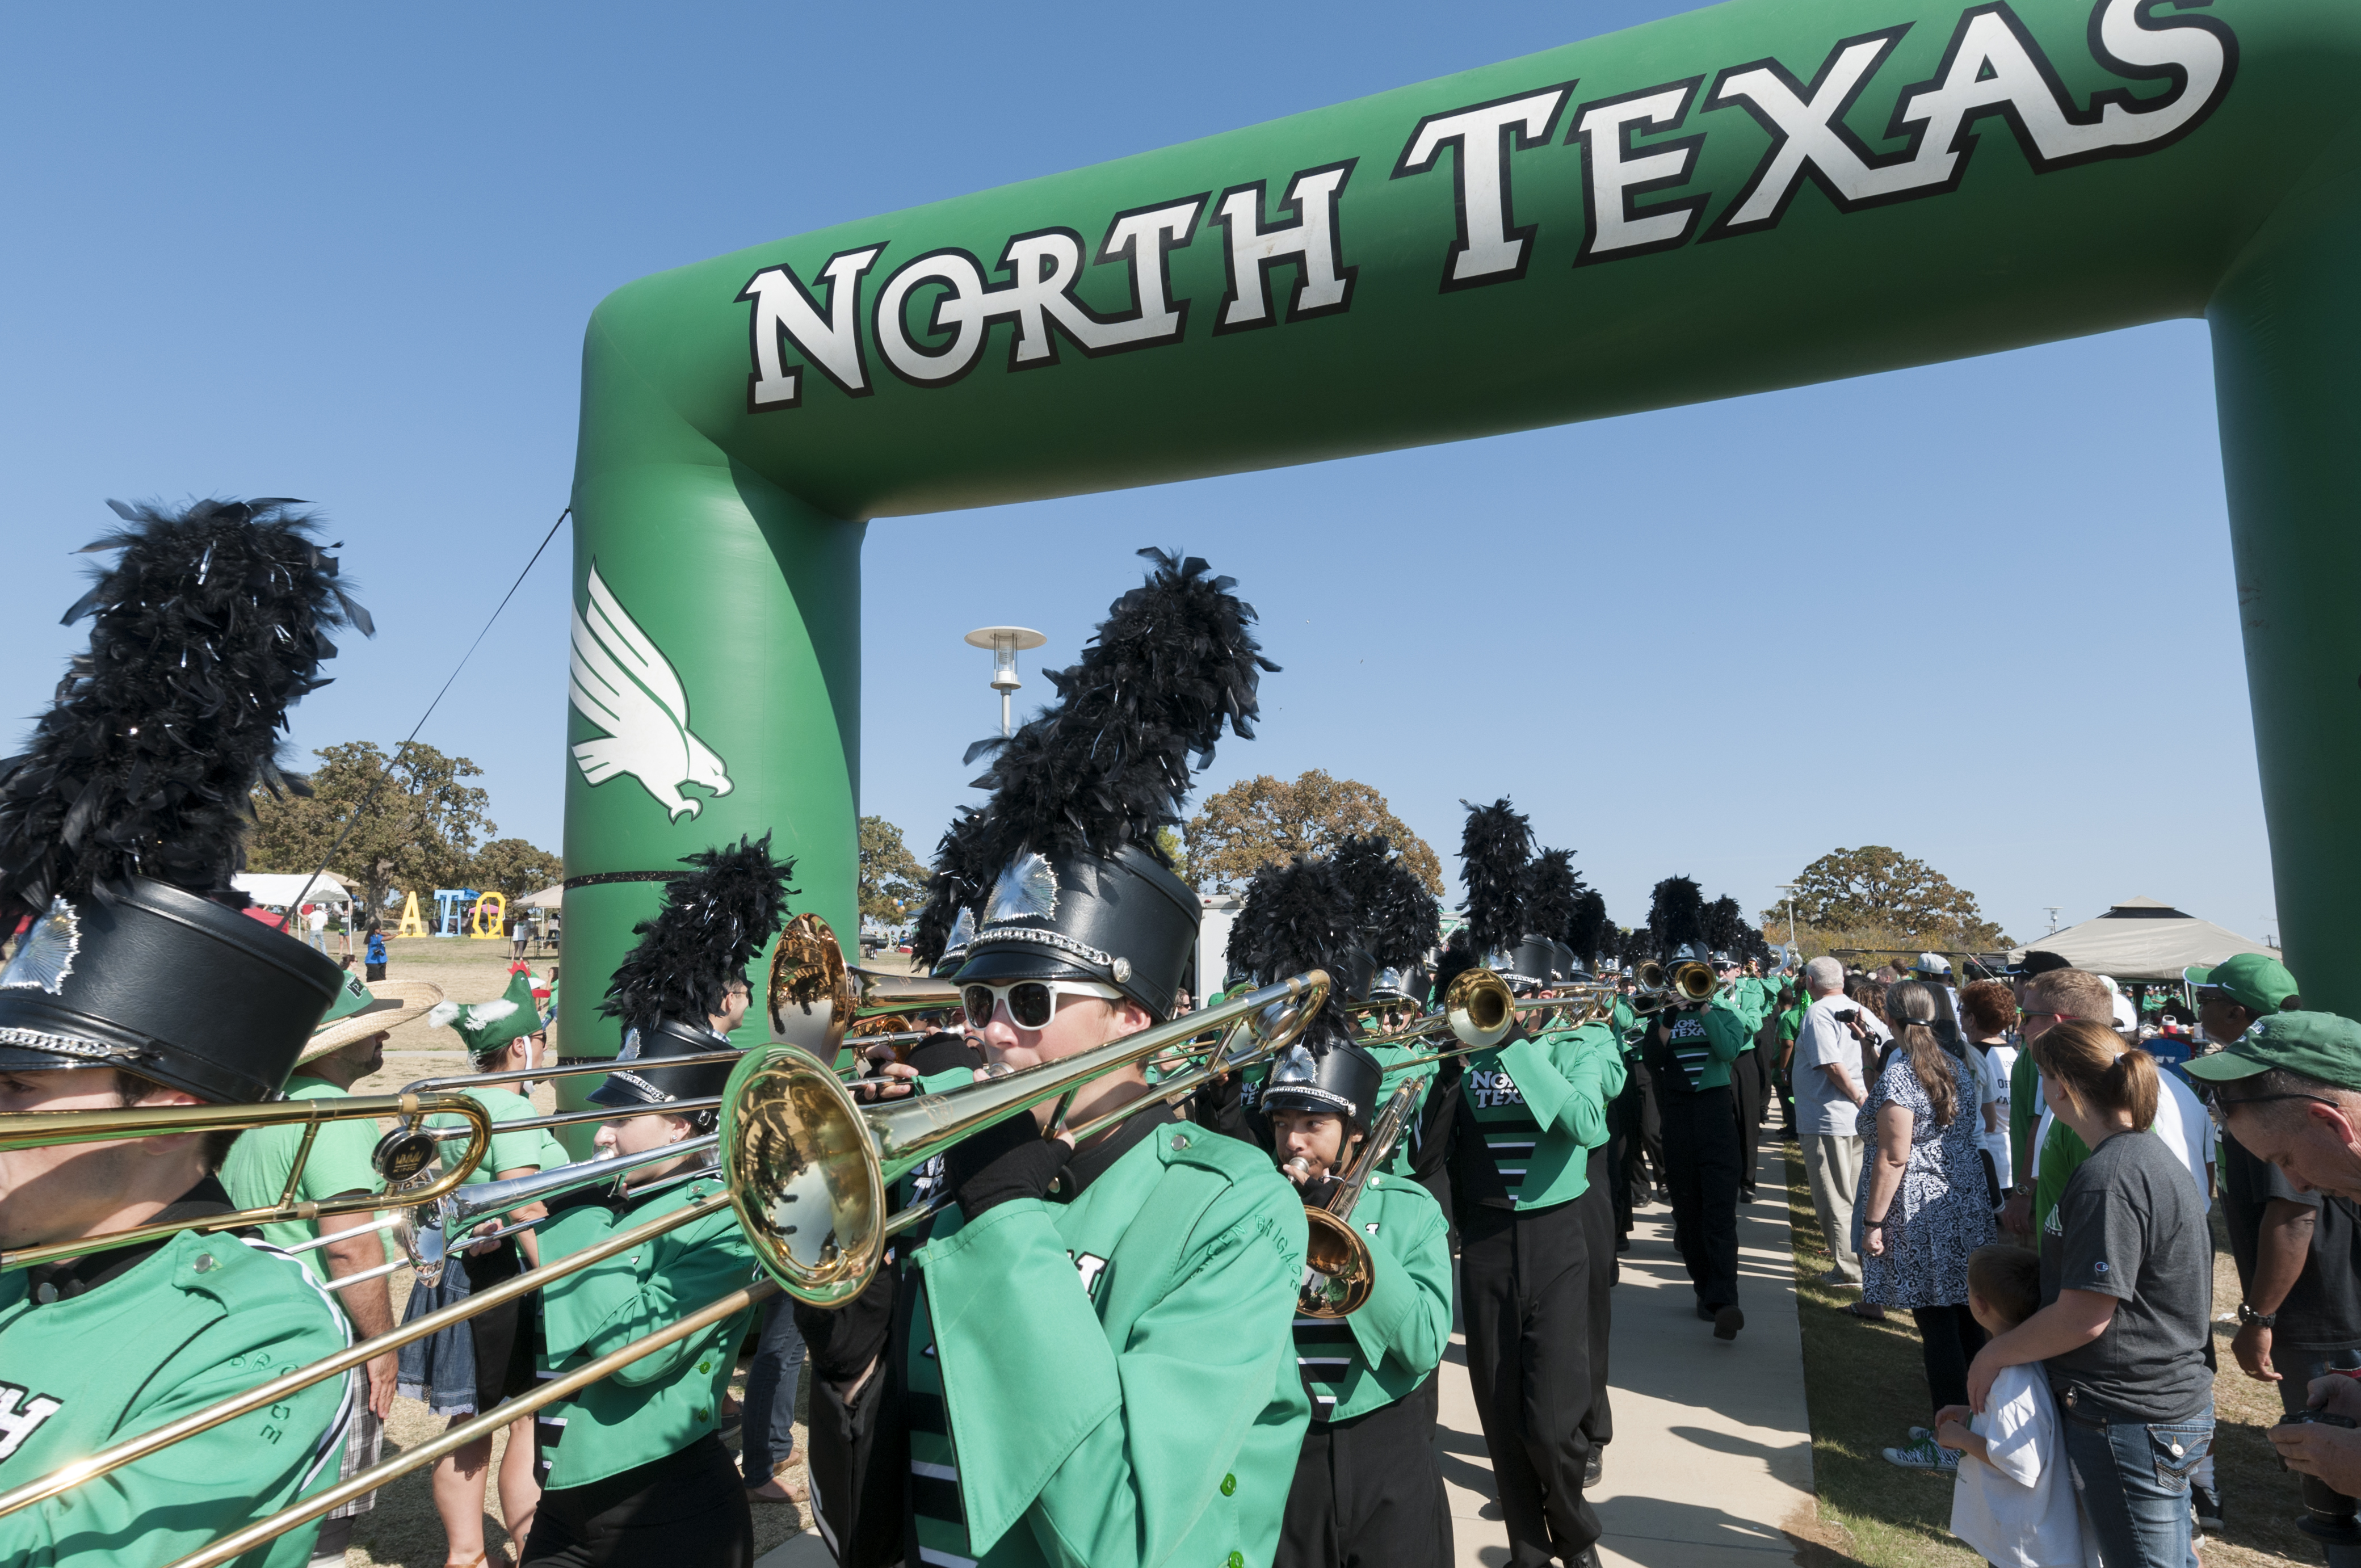 The University of North Texas Green Brigade Marching Band entering the field.